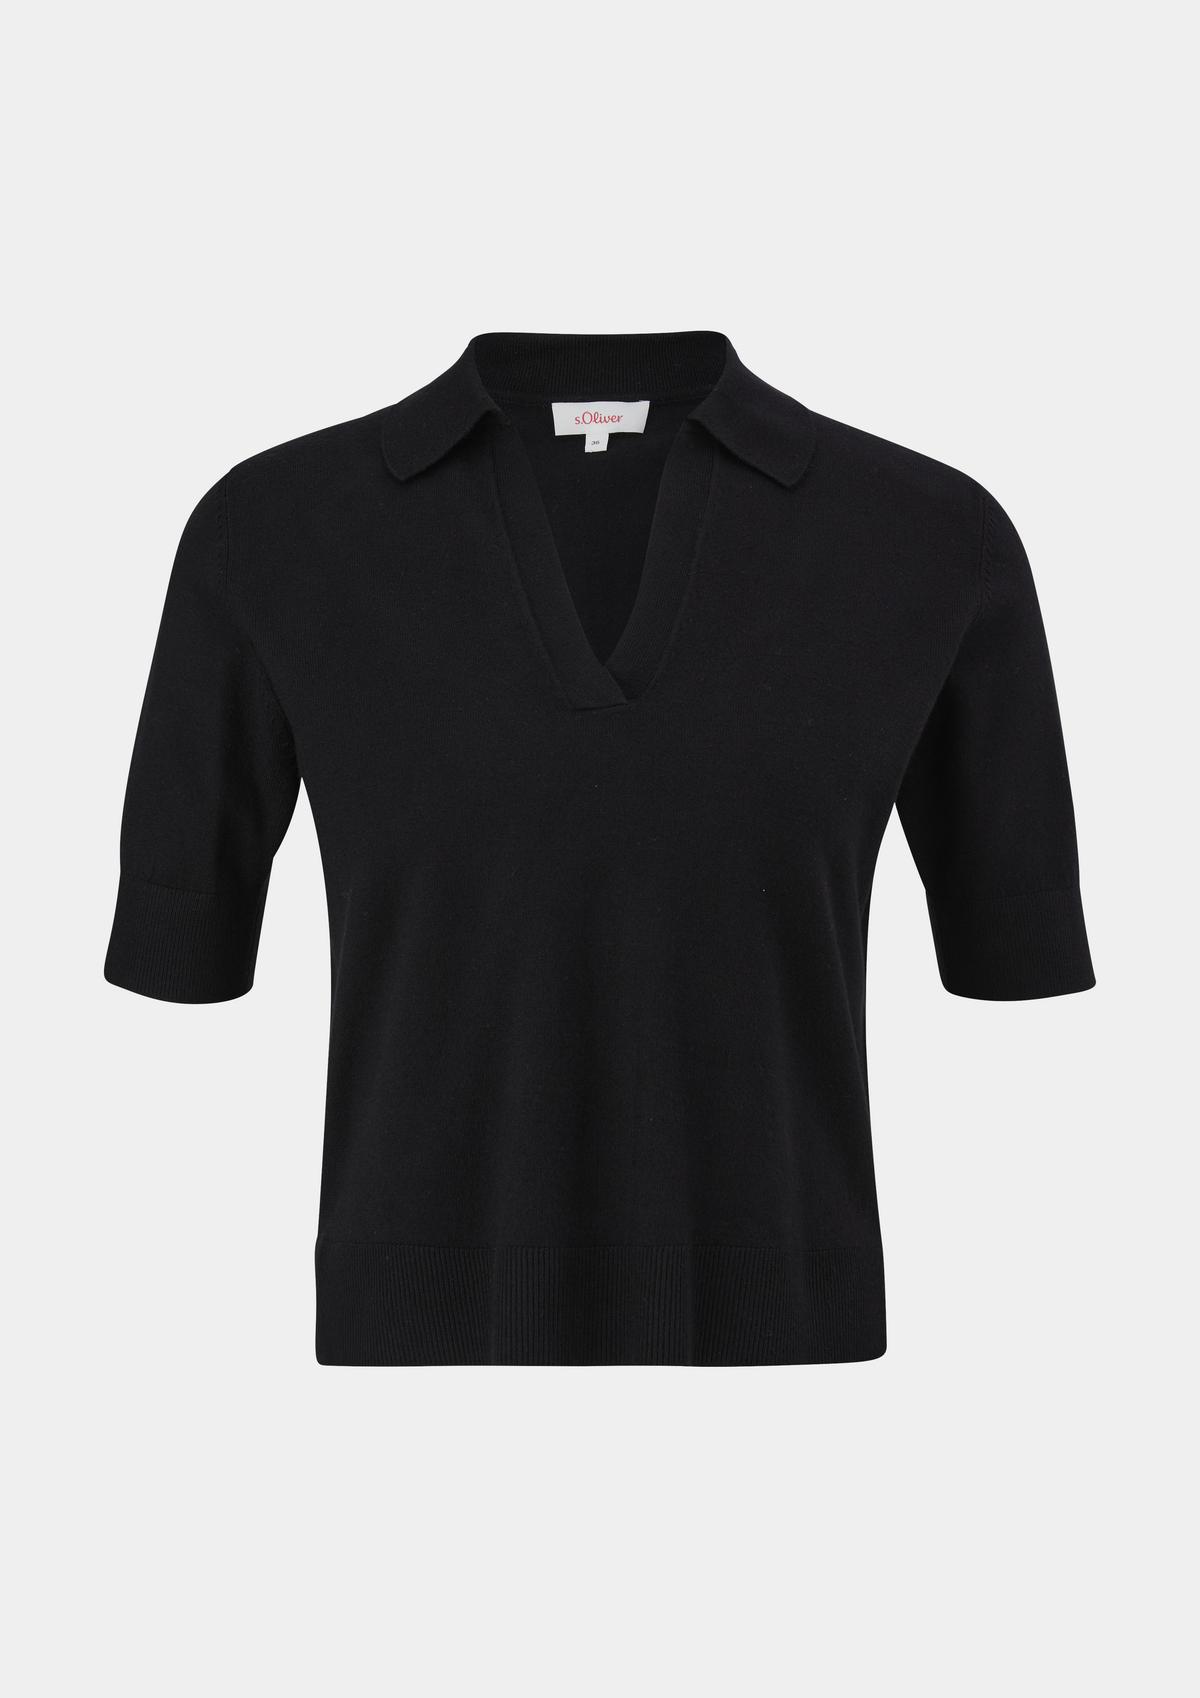 Buy womens polo shirts online